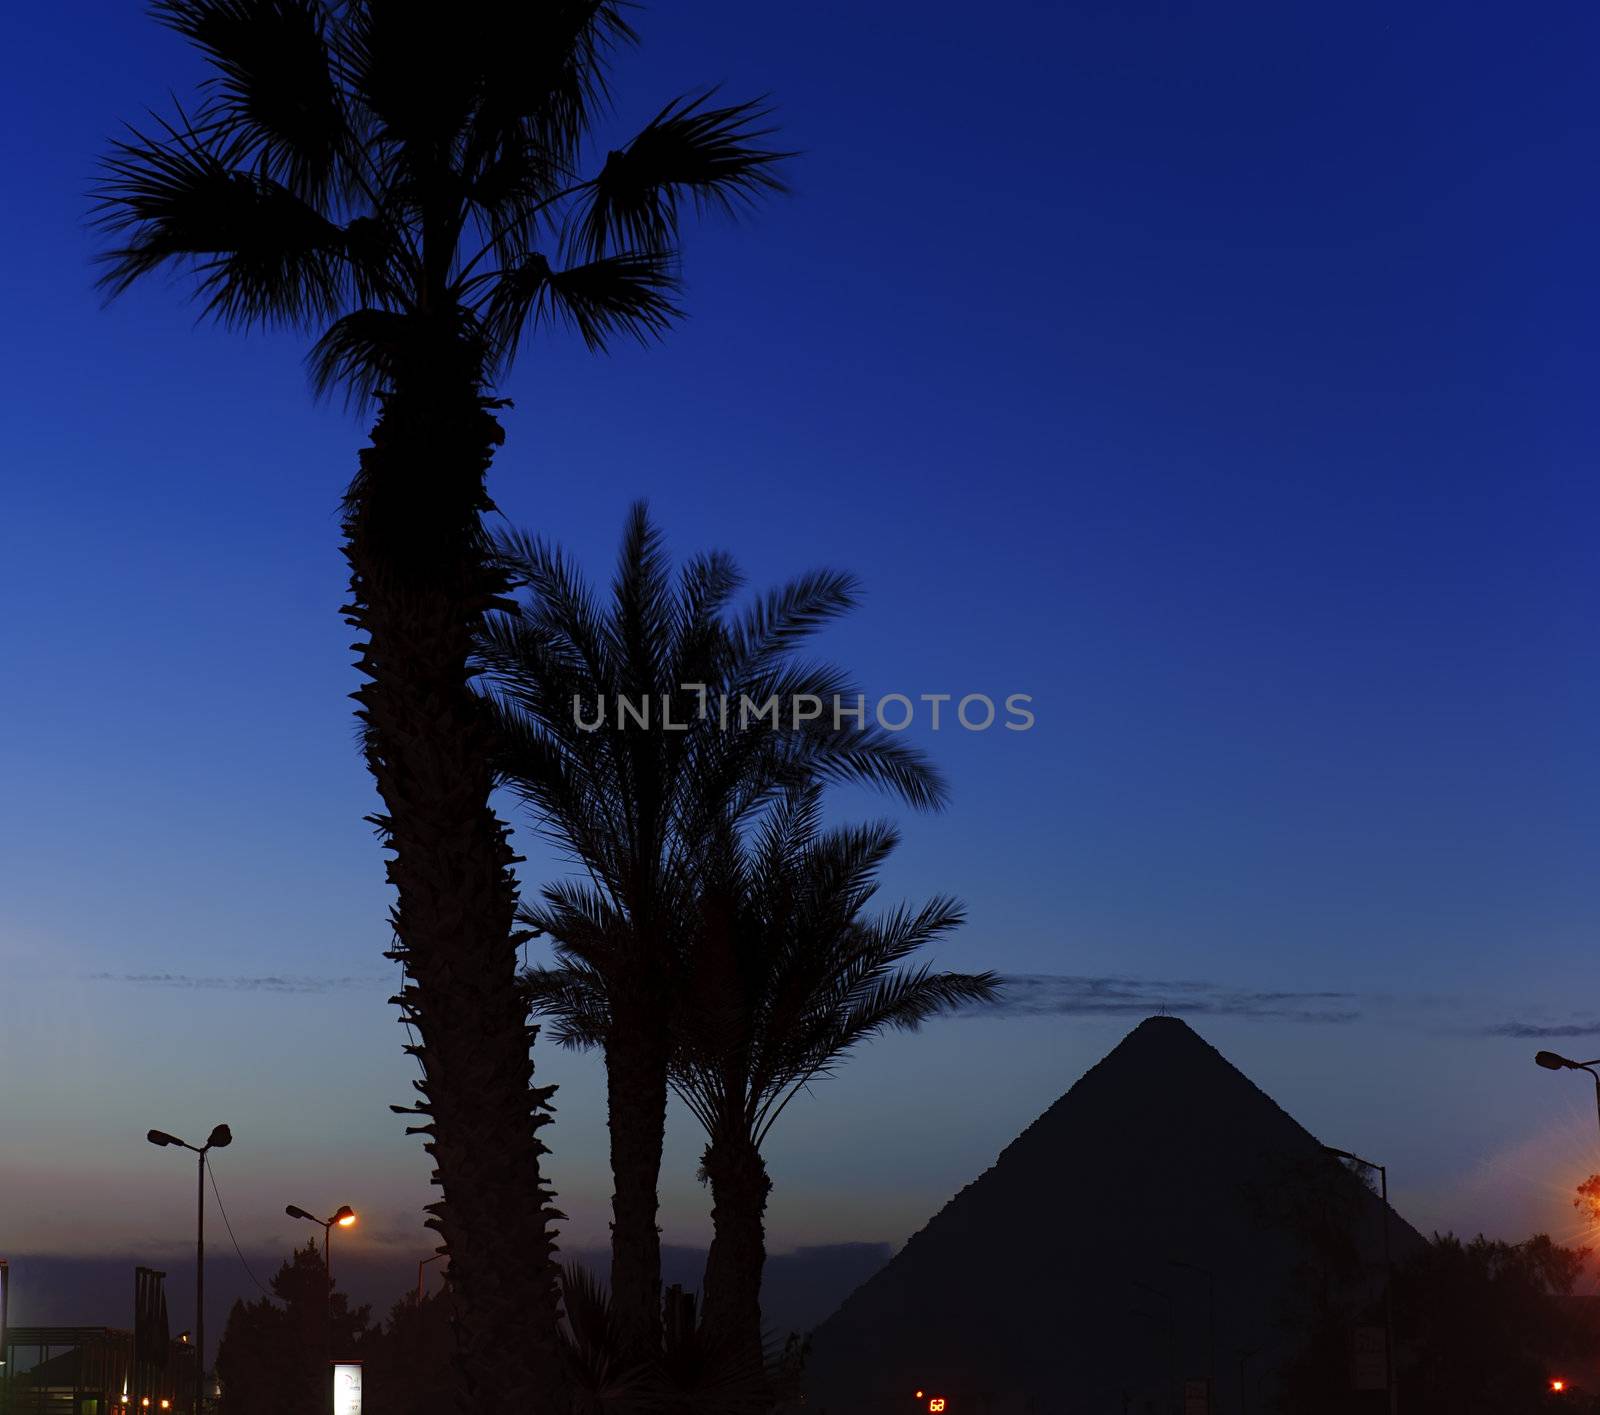 Pyramid of Giza in the morning by jackq